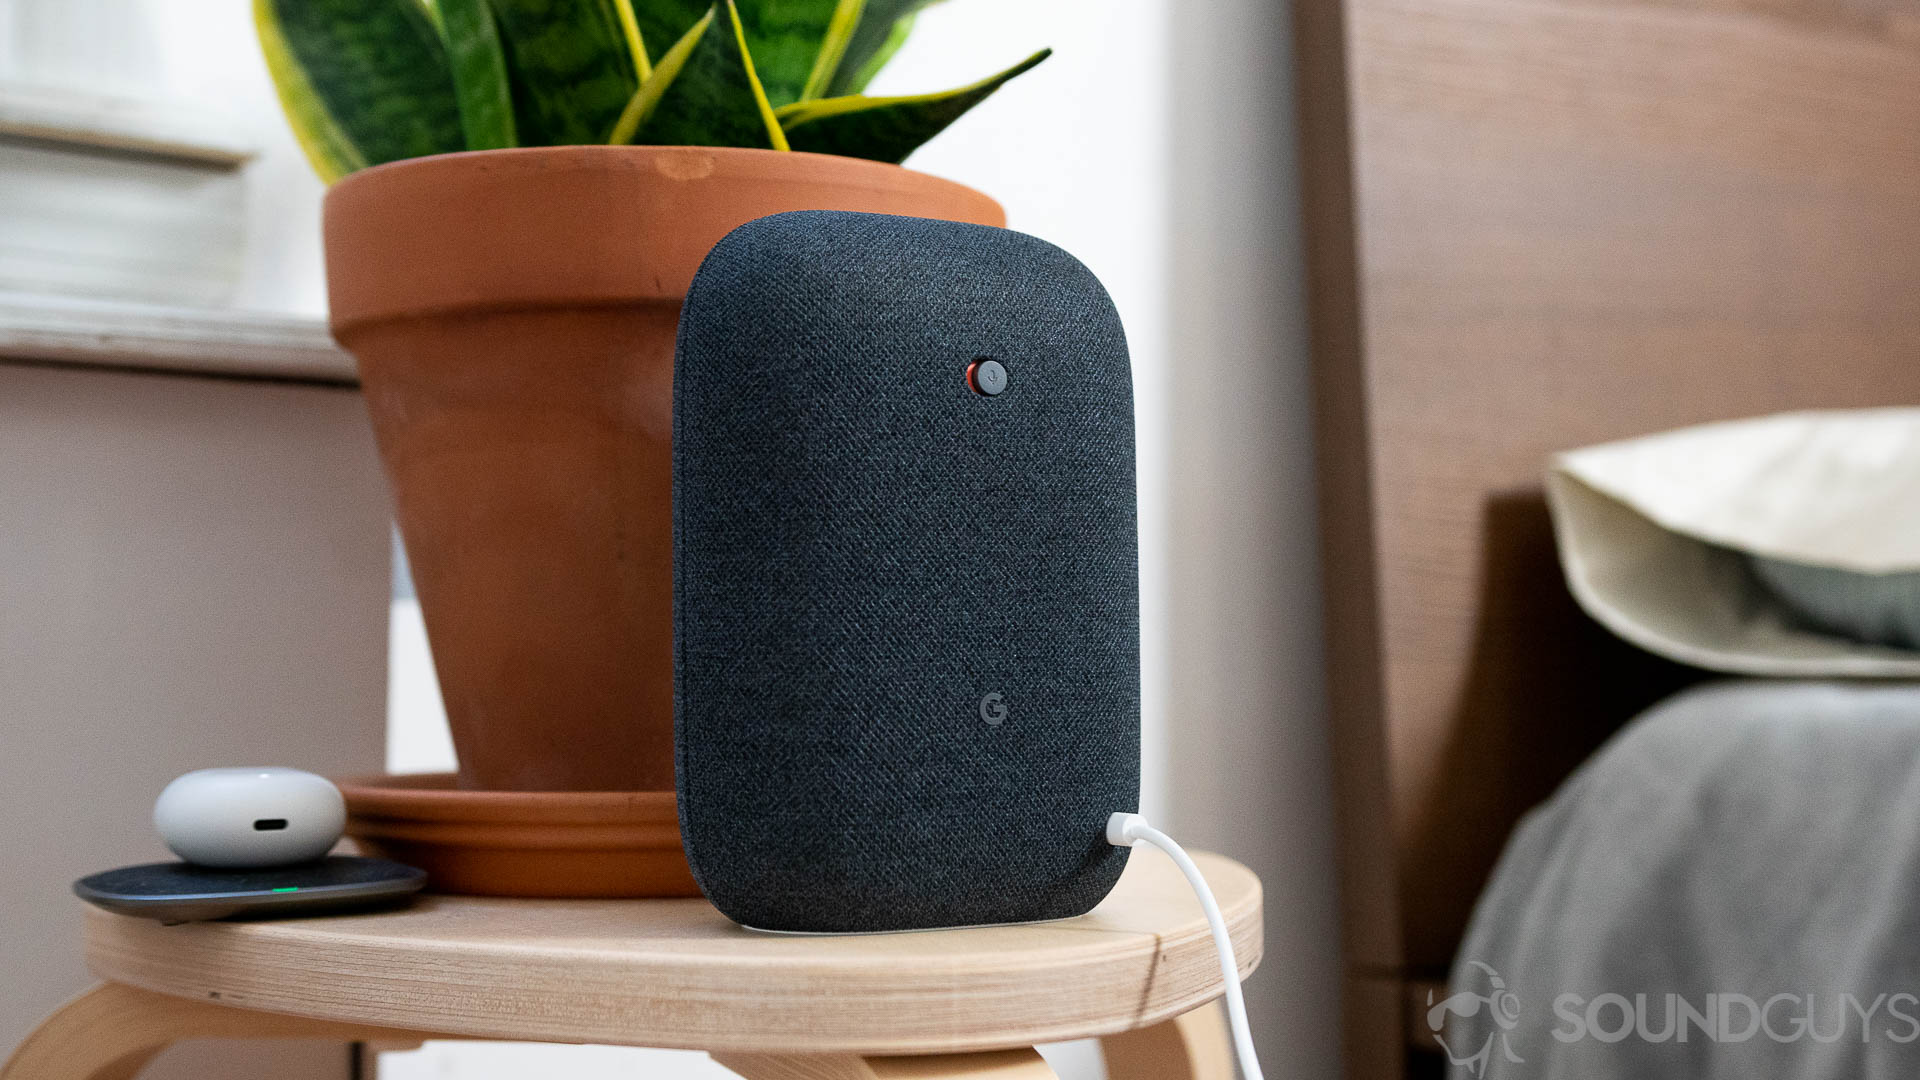 Google Nest Audio in black on nightstand next to bed